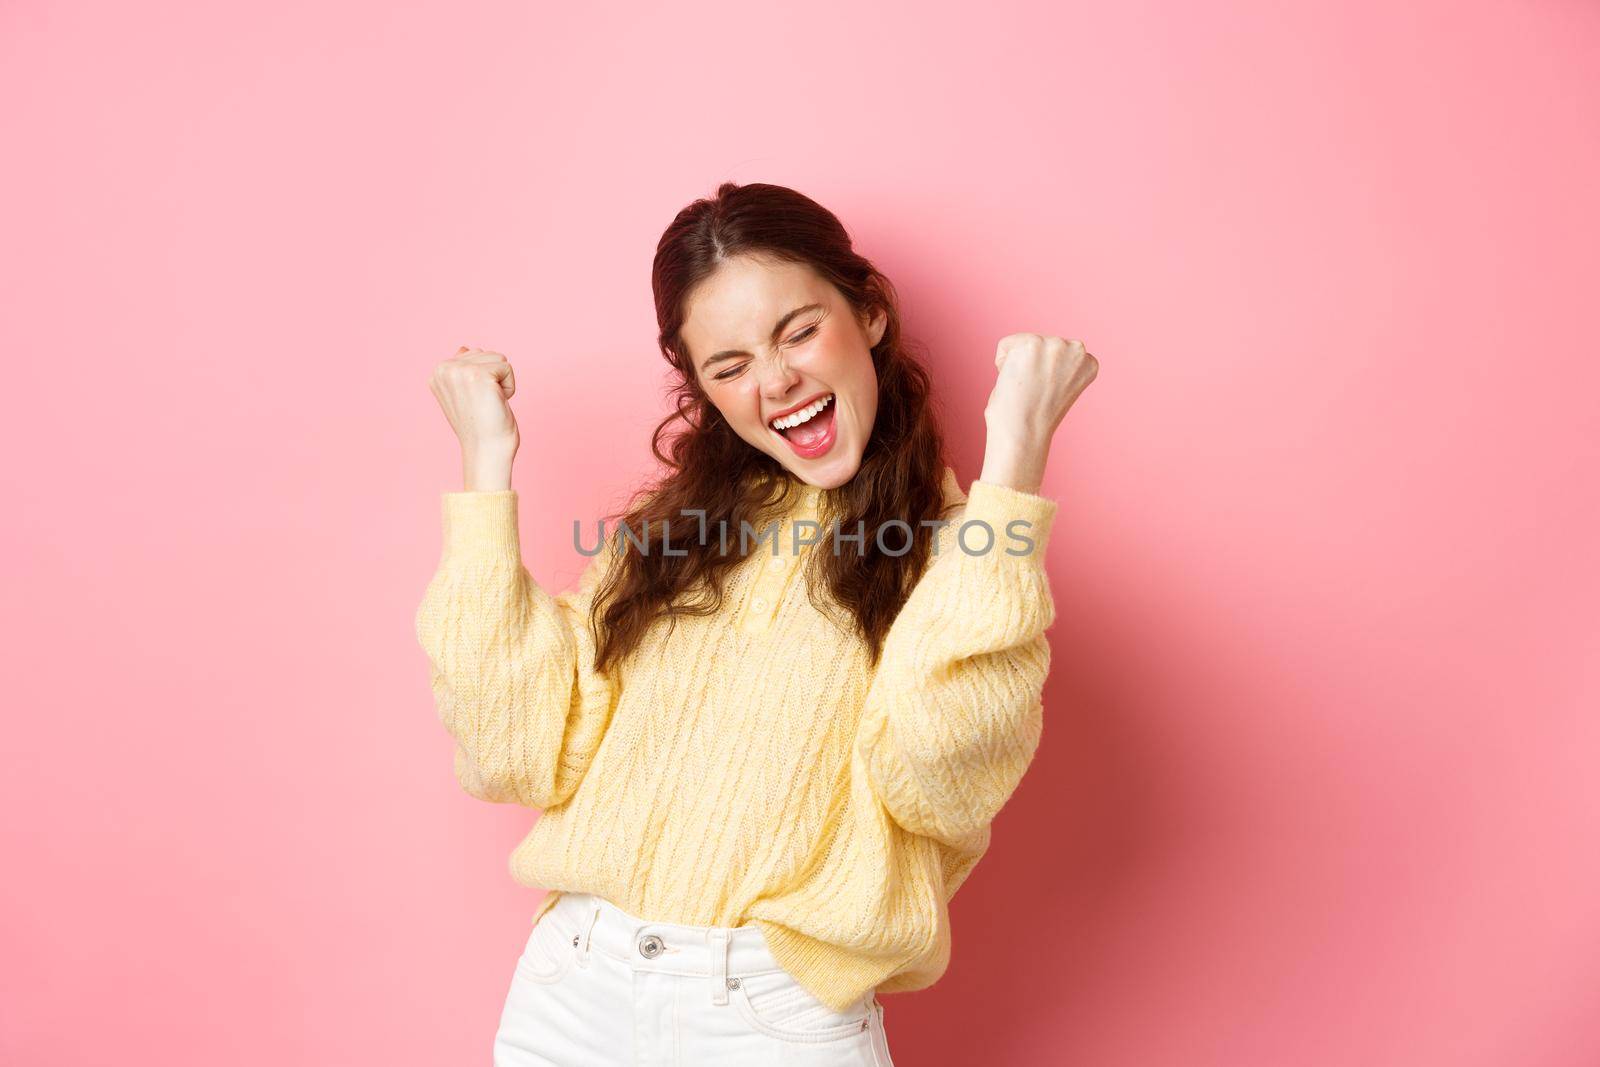 Girl screams with joy and fist pump, say yes, achieve goal or success, celebrating achievement, triumphing and winning, standing over pink background.